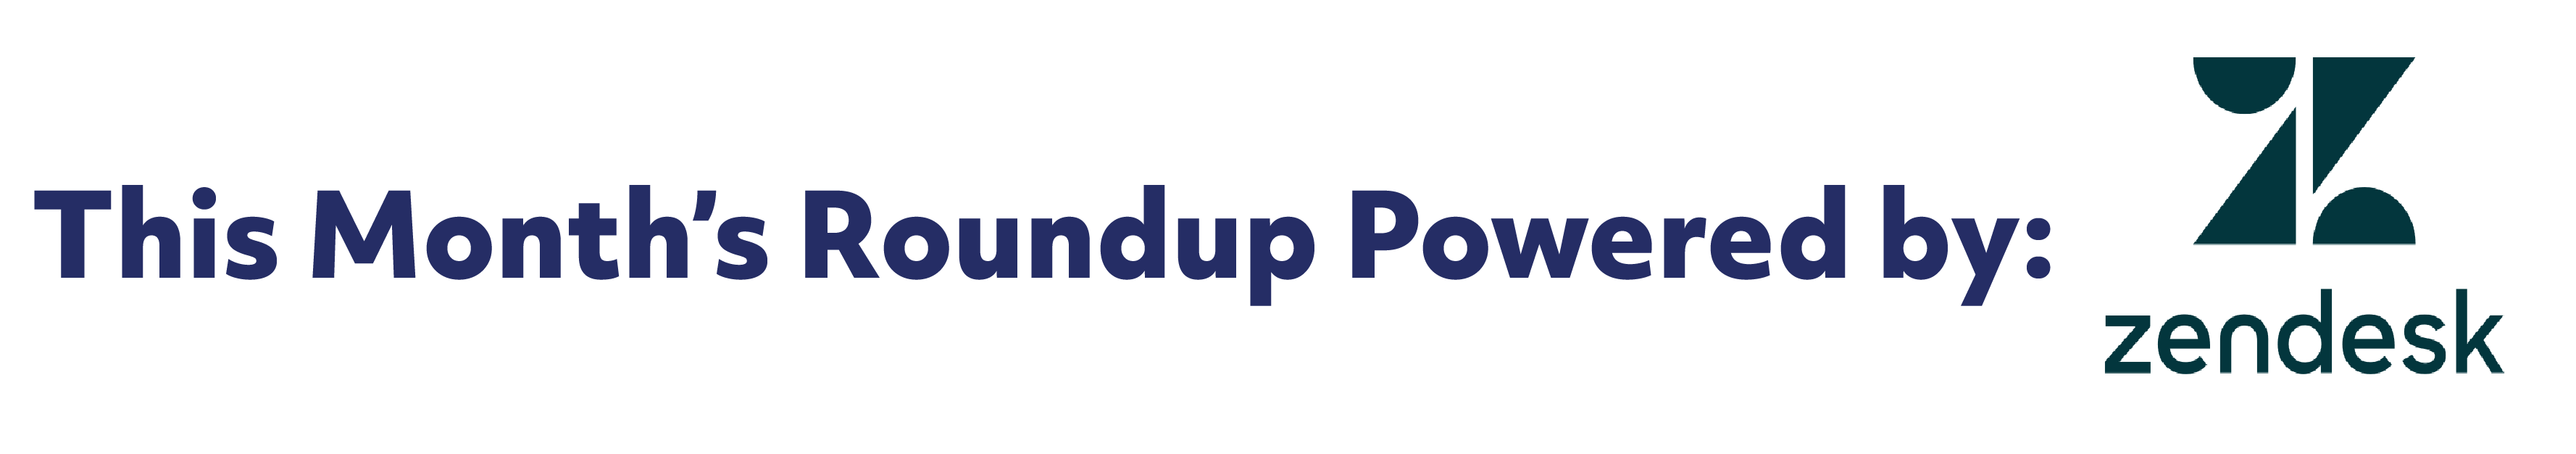 This Month’s Roundup Powered by: Zendesk.